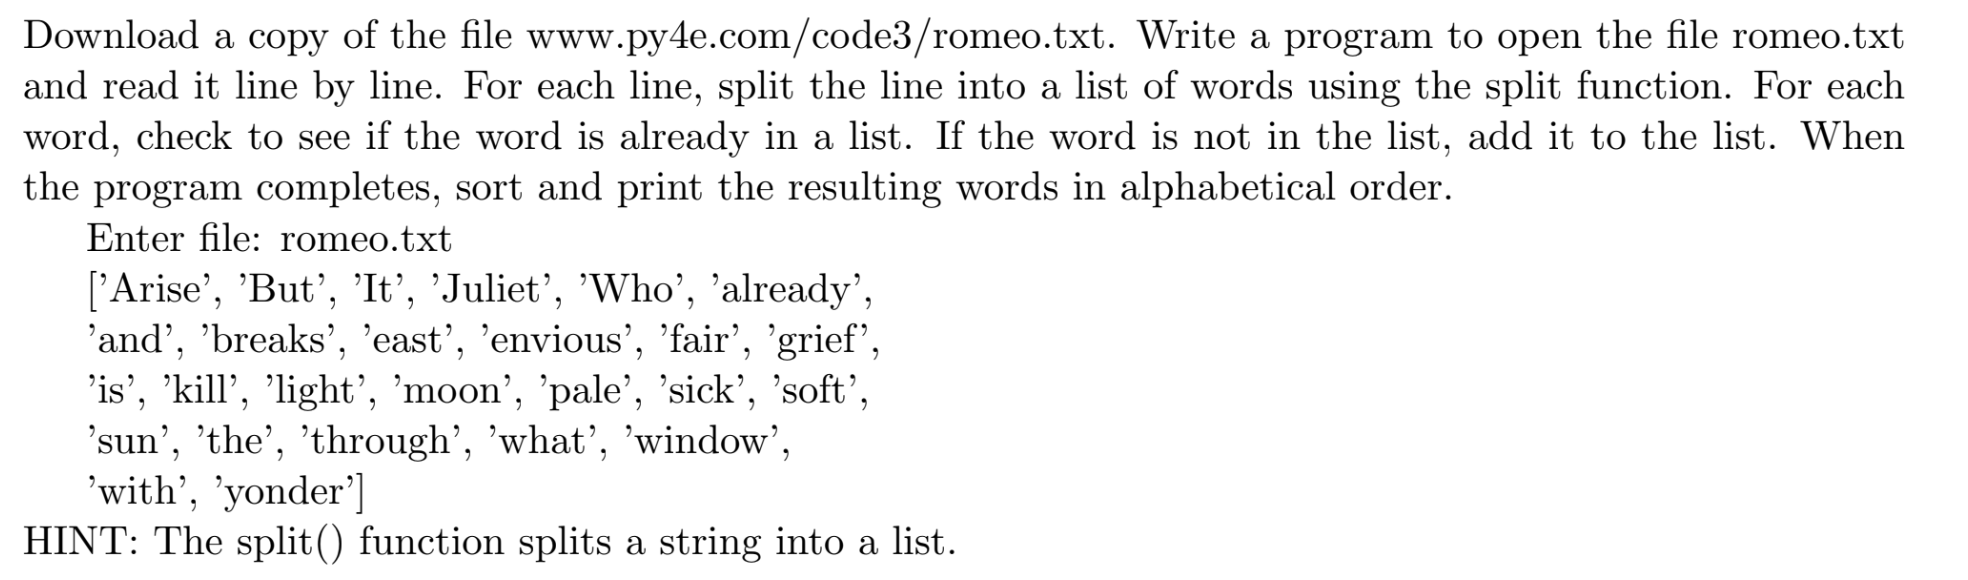 Download a copy of the file www.py4e.com/code3/romeo.txt. Write a program to open the file romeo.txt
          and read it line by line. For each line, split the line into a list of words using the split function. For each
          word, check to see if the word is already in a list. If the word is not in the list, add it to the list. When
          the program completes, sort and print the resulting words in alphabetical order.
          Enter file: romeo.txt
          [’Arise’, ’But’, ’It’, ’Juliet’, ’Who’, ’already’,
          ’and’, ’breaks’, ’east’, ’envious’, ’fair’, ’grief’,
          ’is’, ’kill’, ’light’, ’moon’, ’pale’, ’sick’, ’soft’,
          ’sun’, ’the’, ’through’, ’what’, ’window’,
          ’with’, ’yonder’]
          HINT: The split() function splits a string into a list.